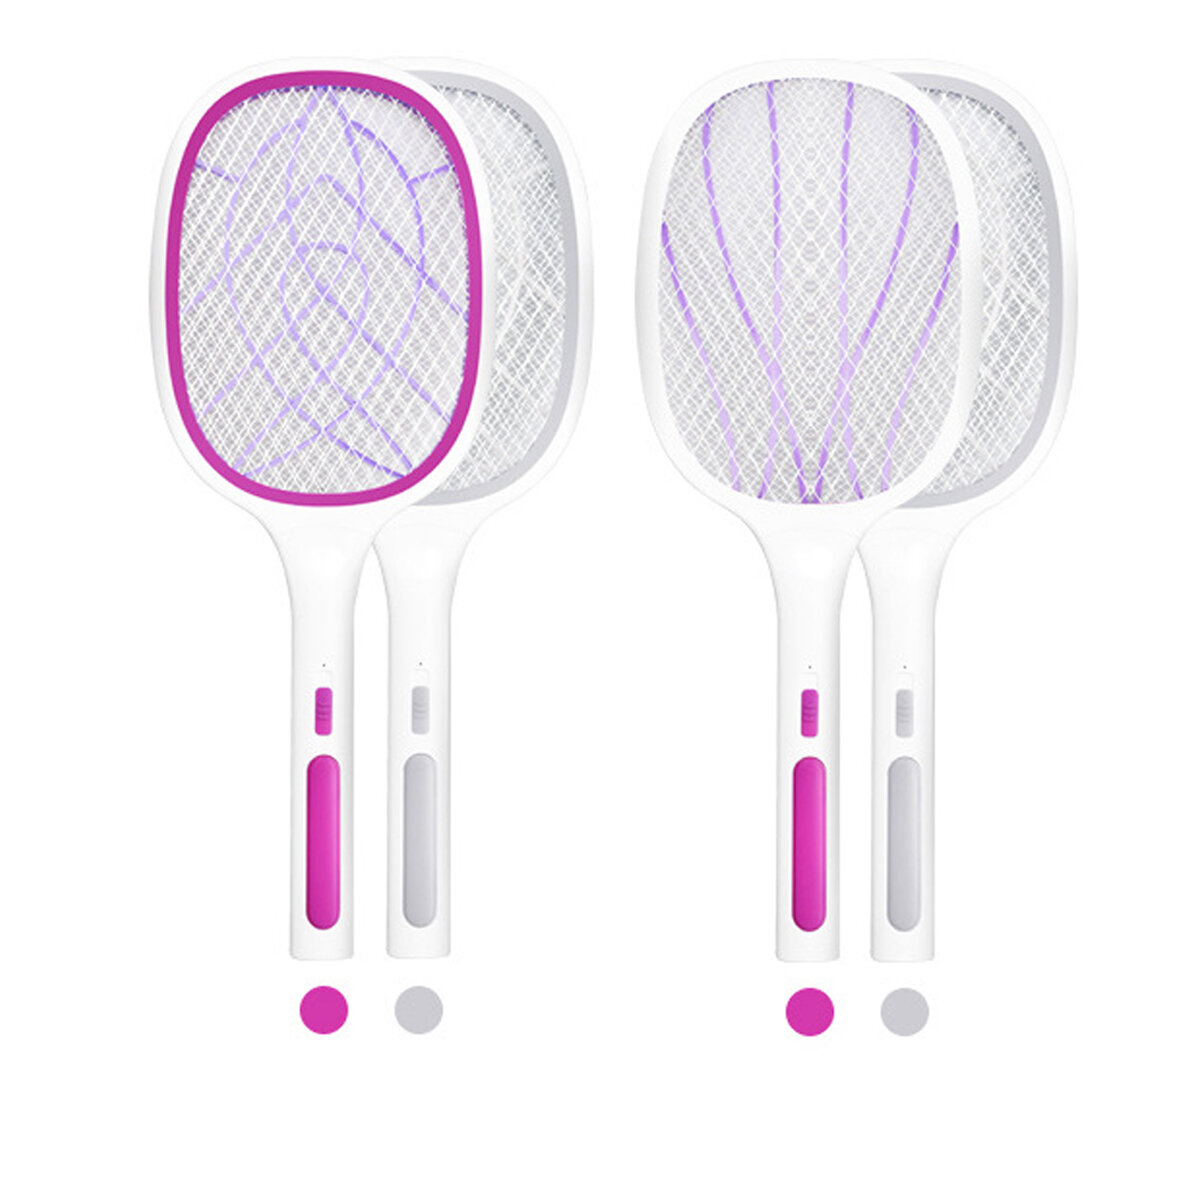 10 / 6LED Electric Flies Mosquito Swatter 3000V Anti Mosquito Fly Bug Zapper Racket Recarregável Summer Trap Flies